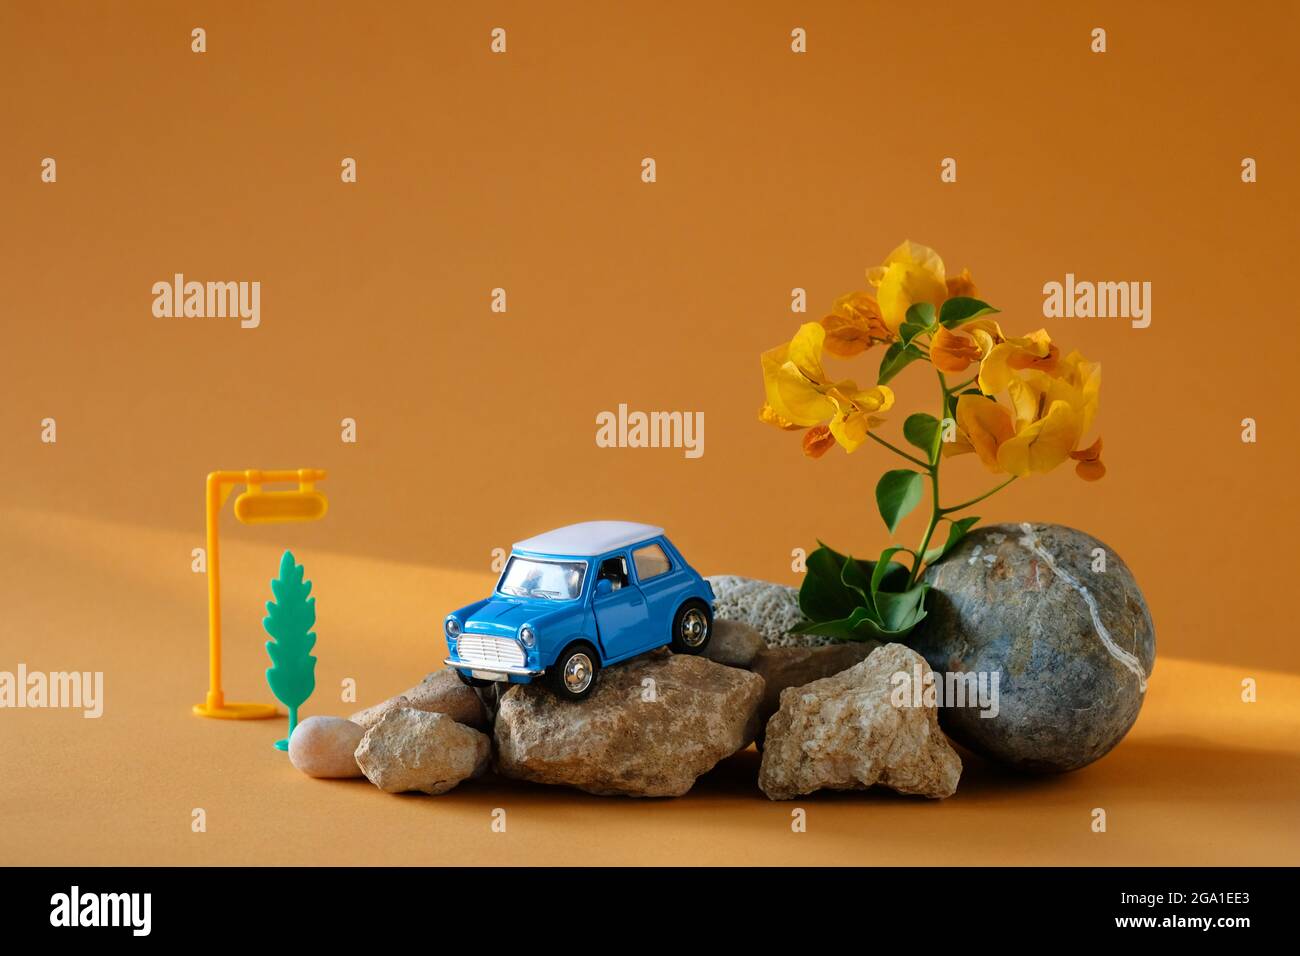 Blue toy car on stones and orange background like a symbol of road trips.Travel concept or rent a car. Stock Photo